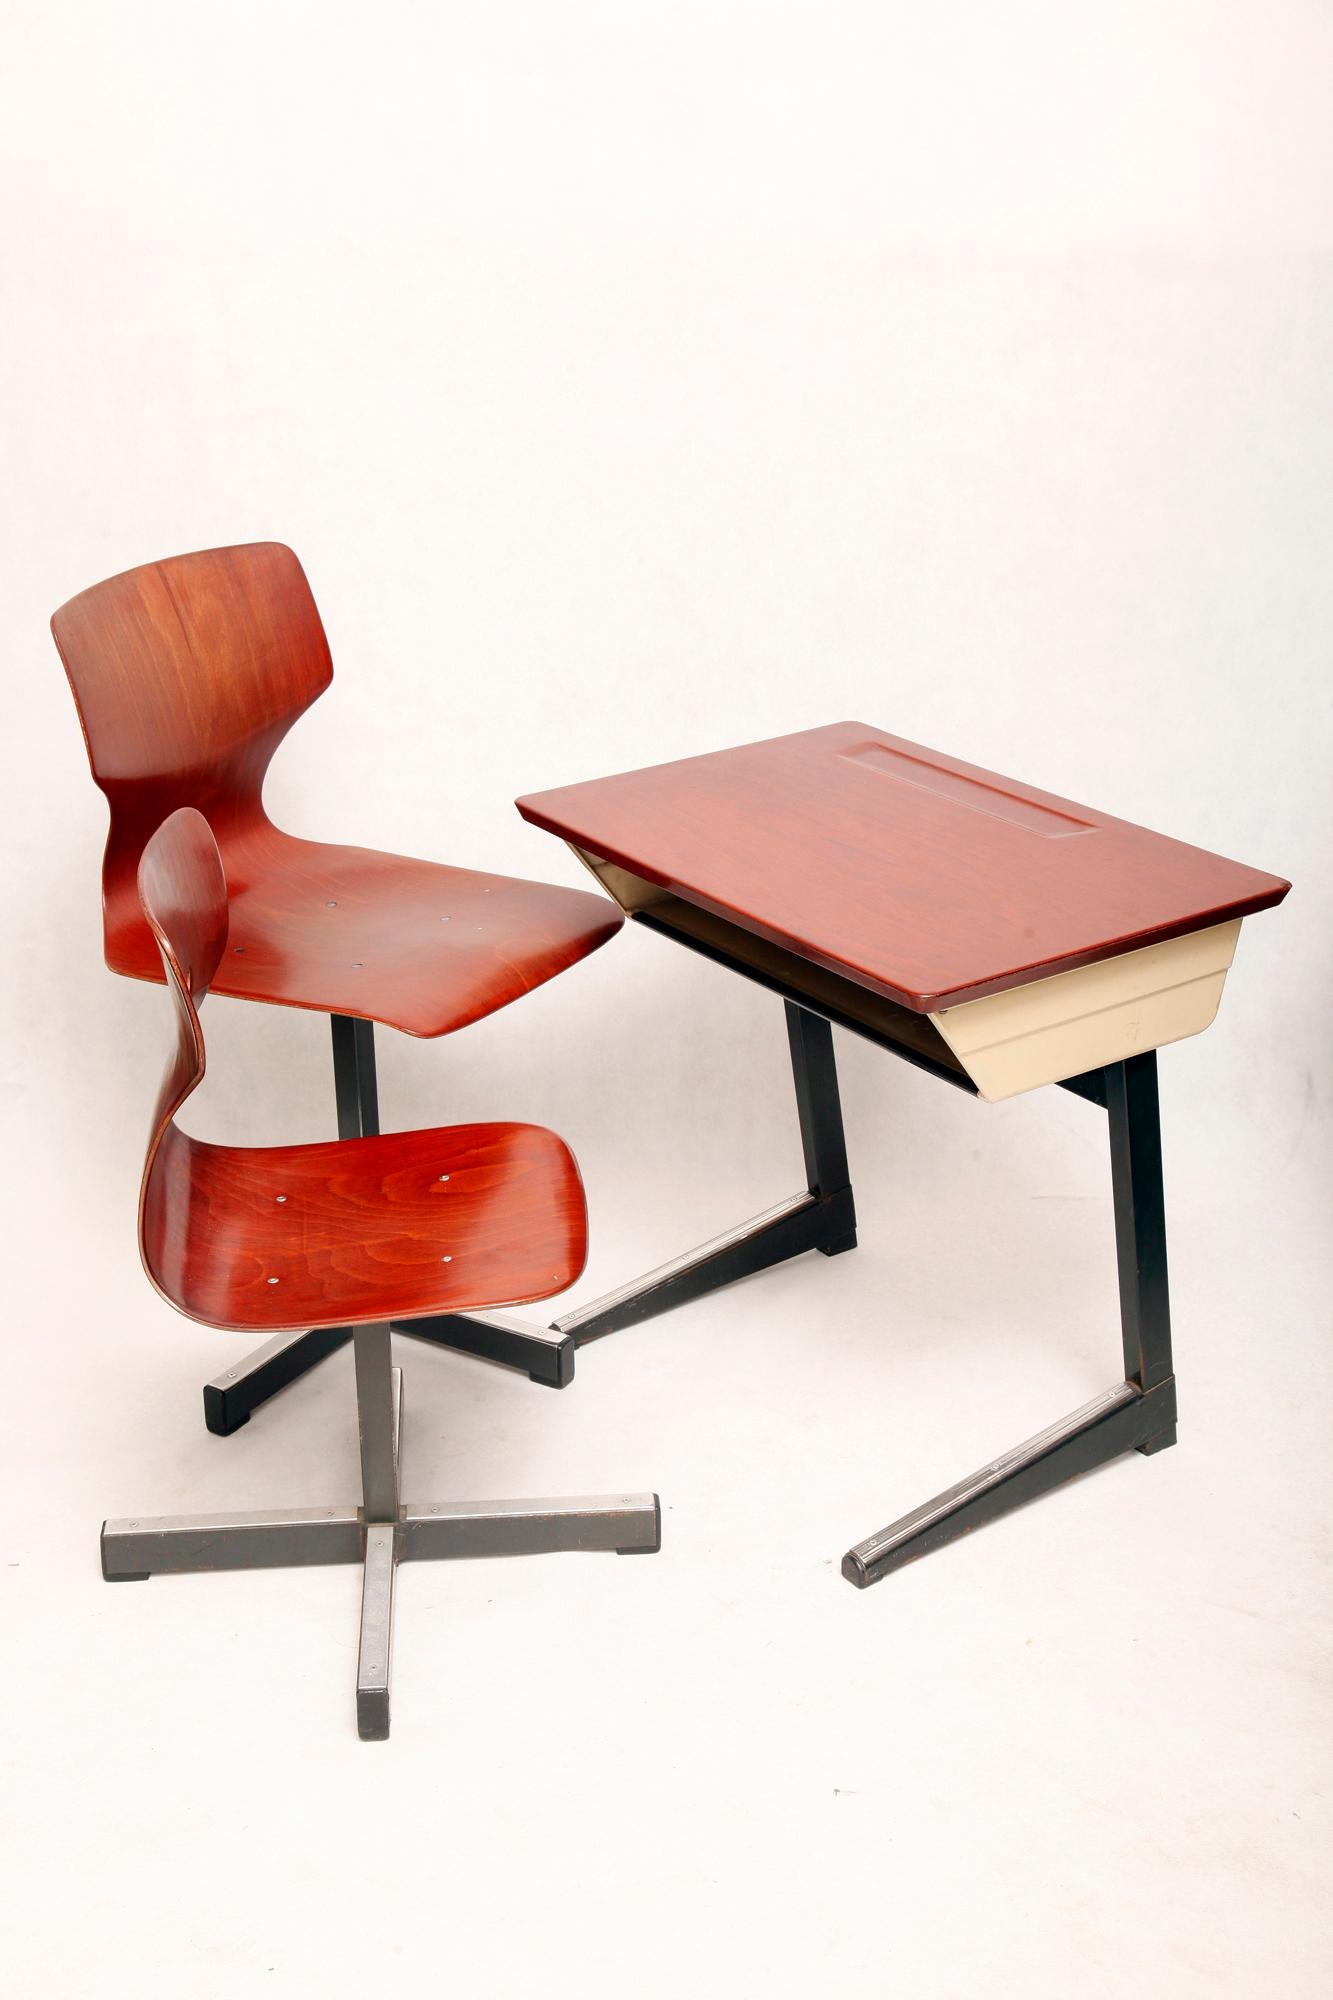 Set of Children Desk or School Bench with Two Flototto Chairs, Germany, 1970s (Stahl) im Angebot